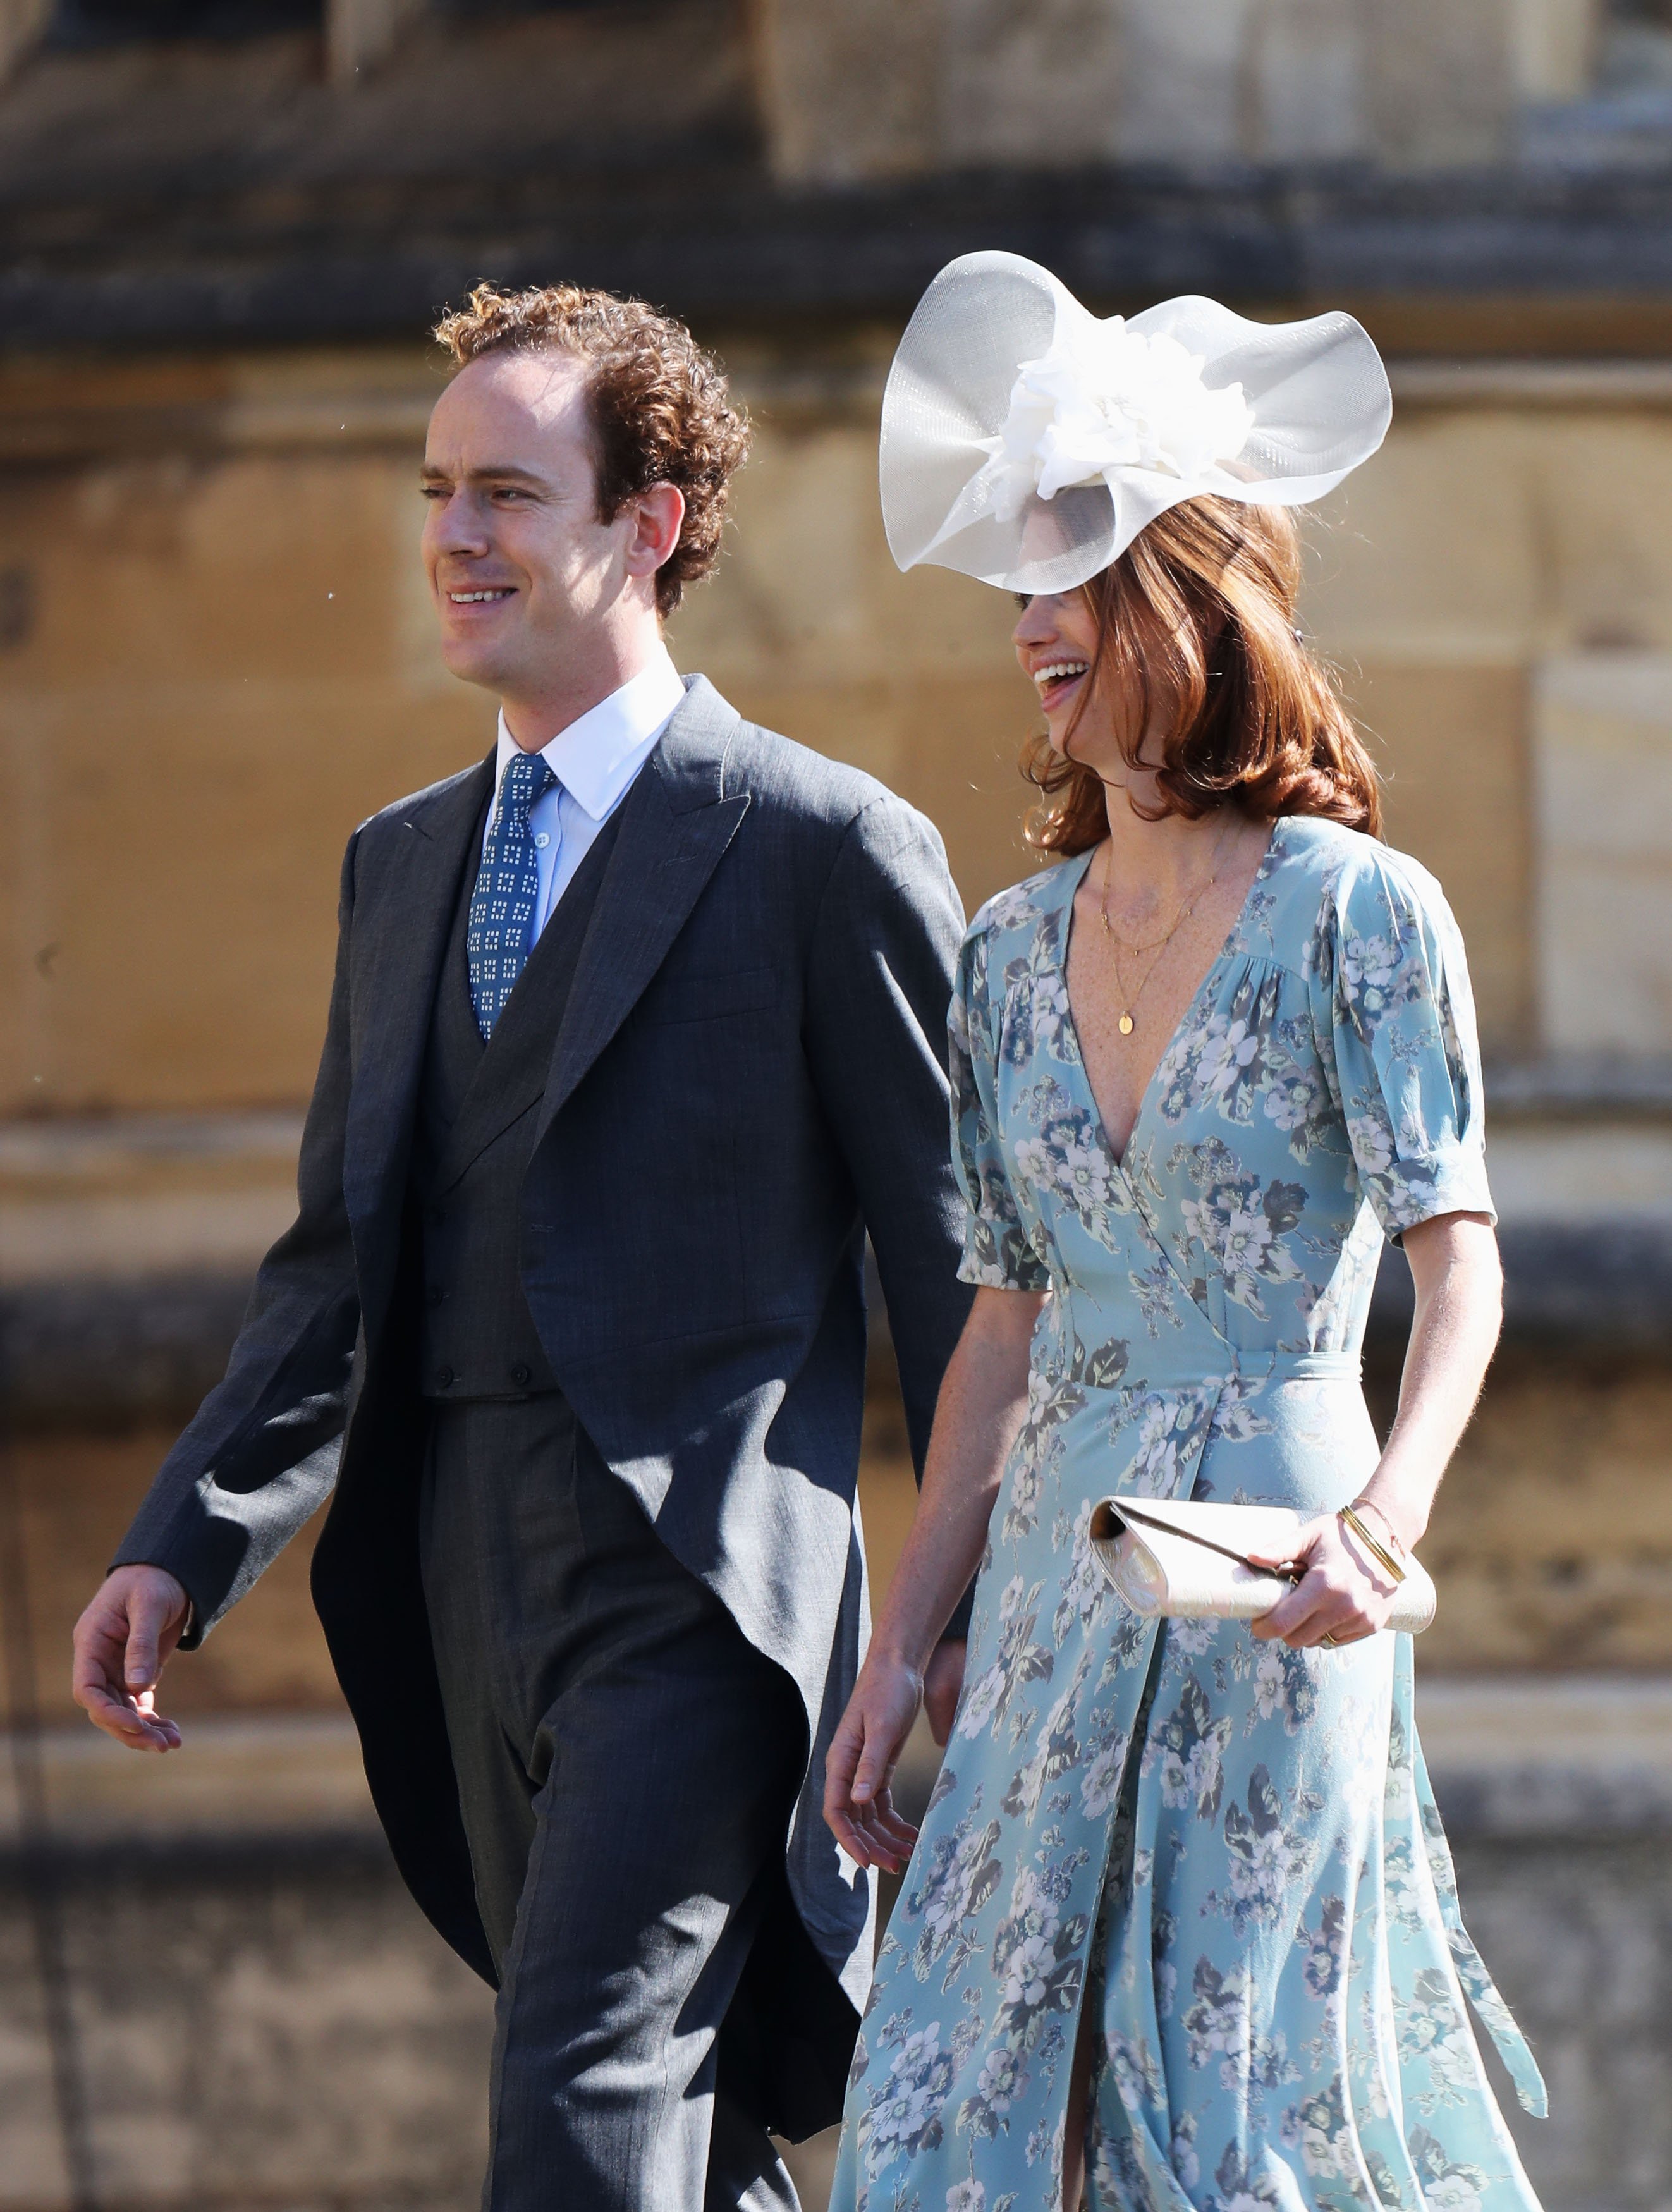 Tom Inskip and Lara Inskip arriving at the wedding of Prince Harry and Meghan Markle at St George's Chapel, Windsor Castle on May 19, 2018 in Windsor, England. | Source: Getty Images